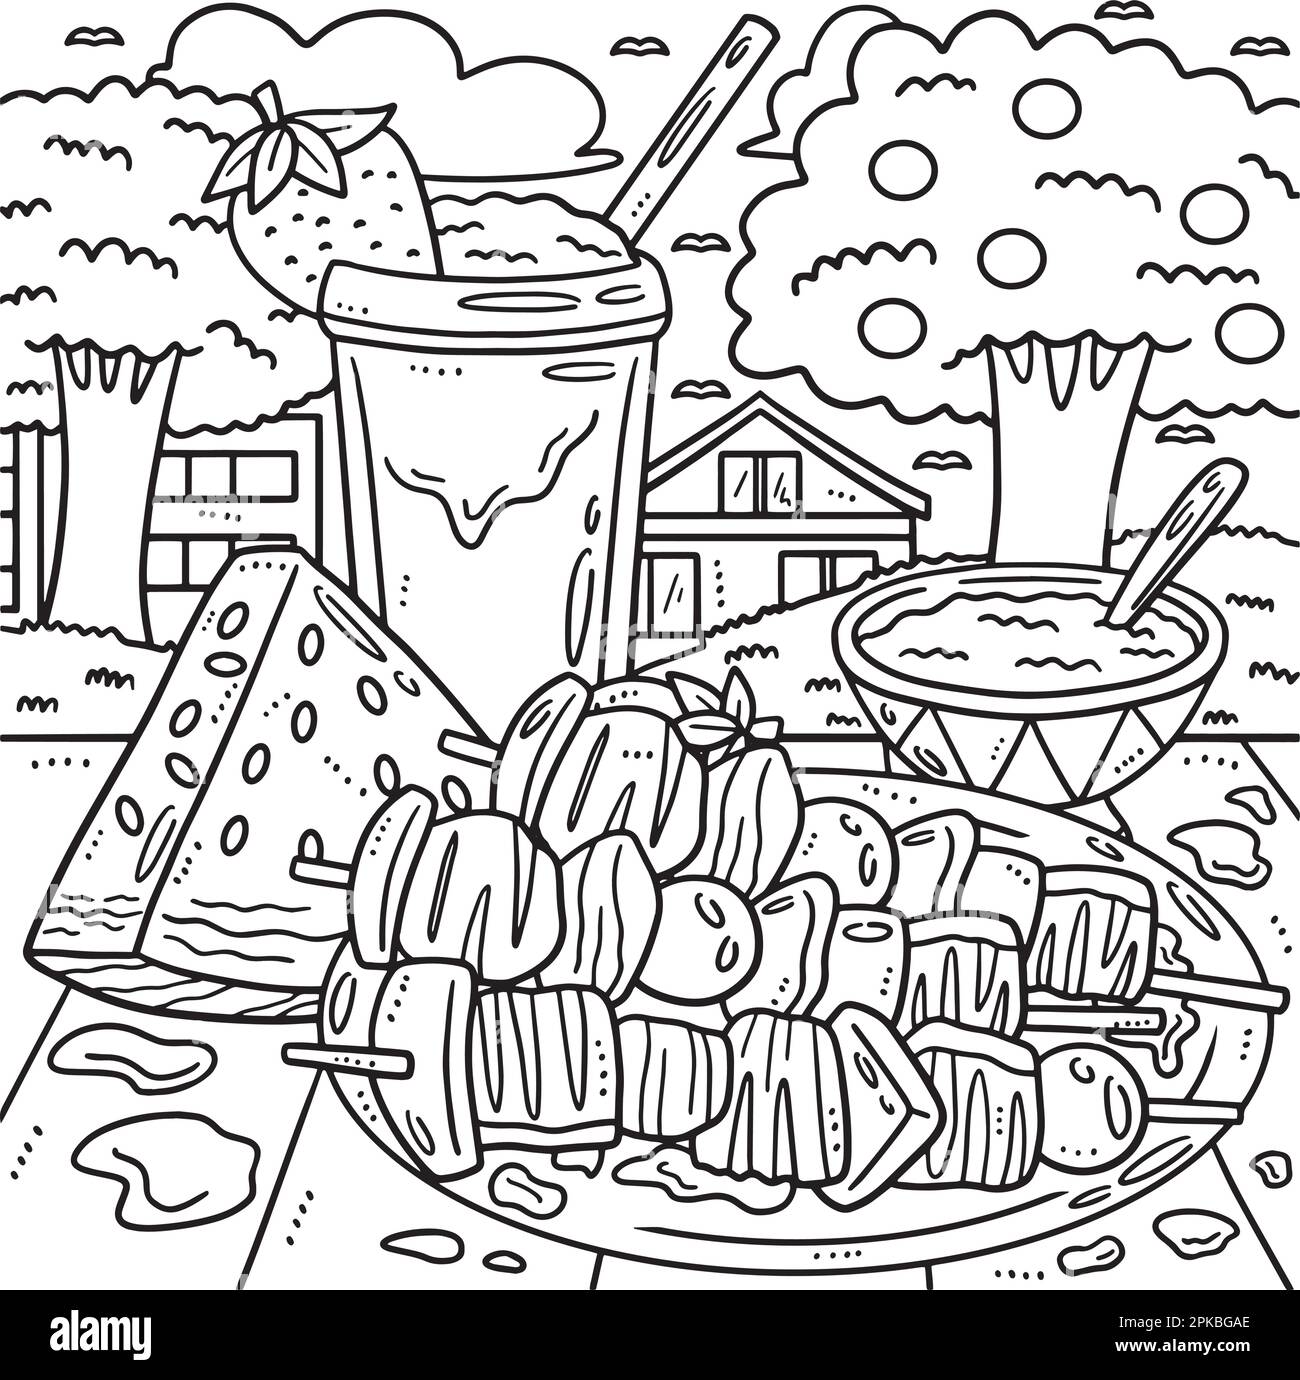 Juneteenth African American Food Coloring Page Stock Vector